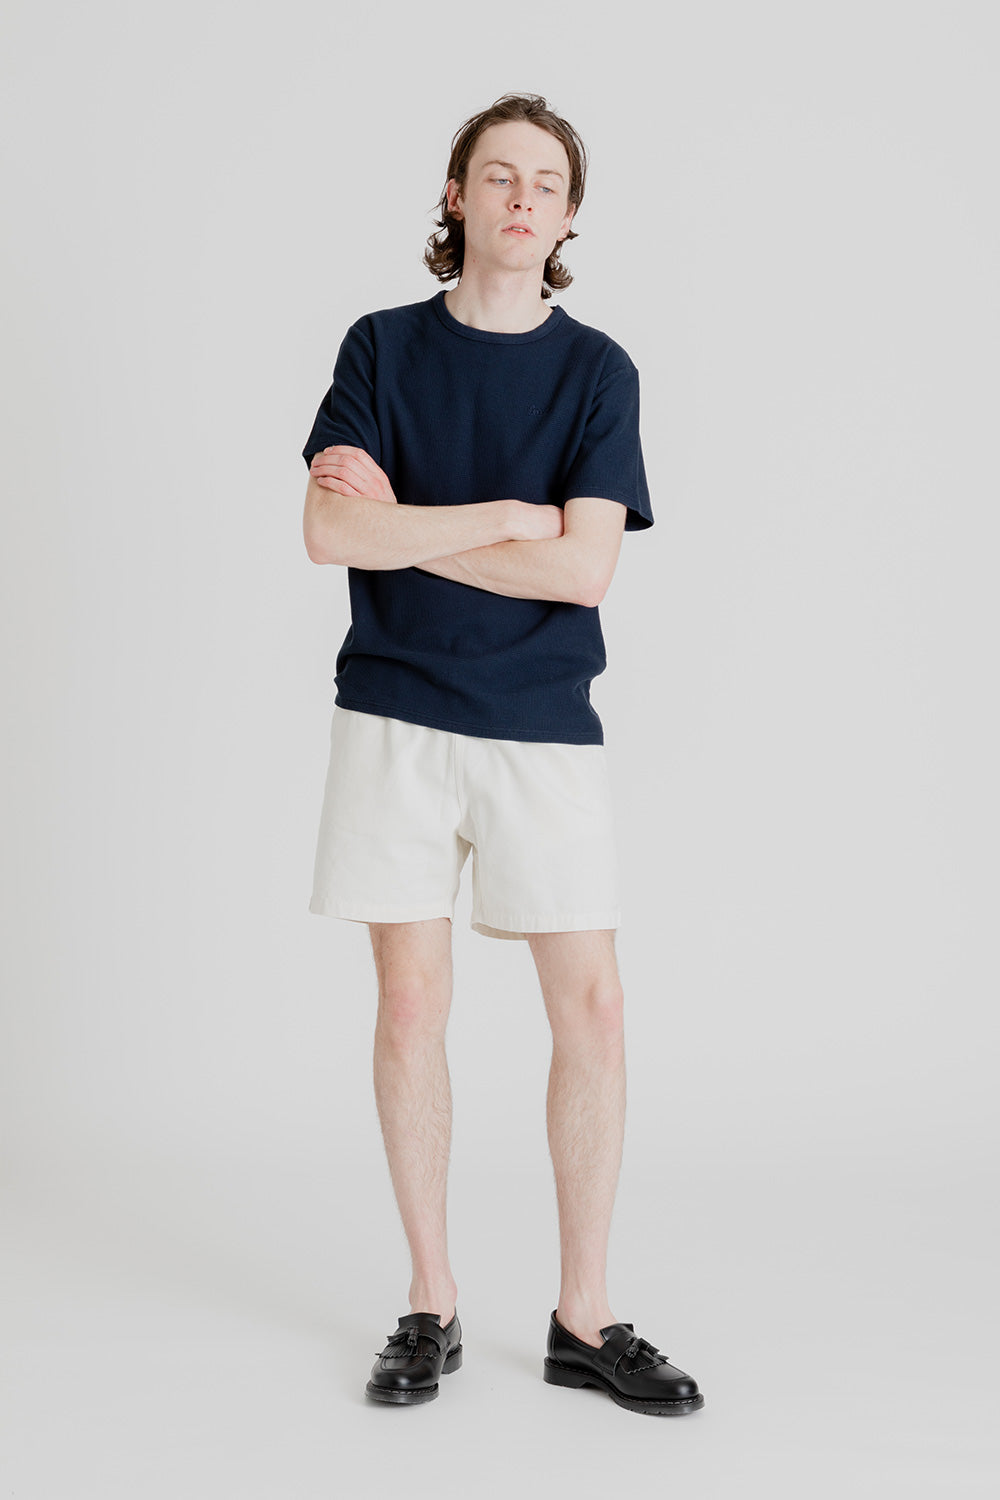 foret-park-tee-navy